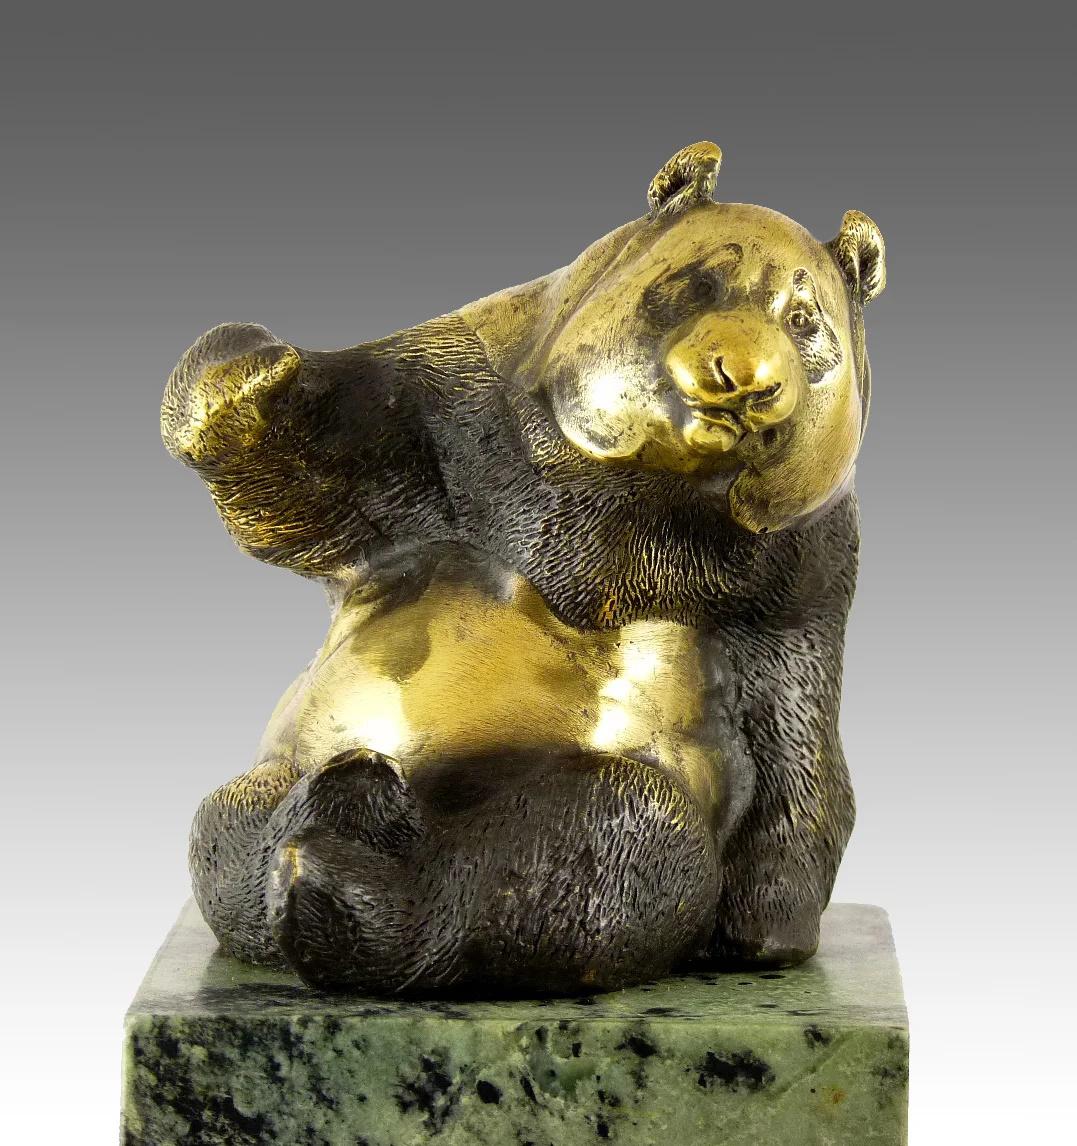 Gilded bronze sculpture with patina representing a Panda, 20th century.

A gilt bronze and patina sculpture, marble base, of a seated Panda, 20th century.  

h: 21cm, w: 8cm, d: 9cm